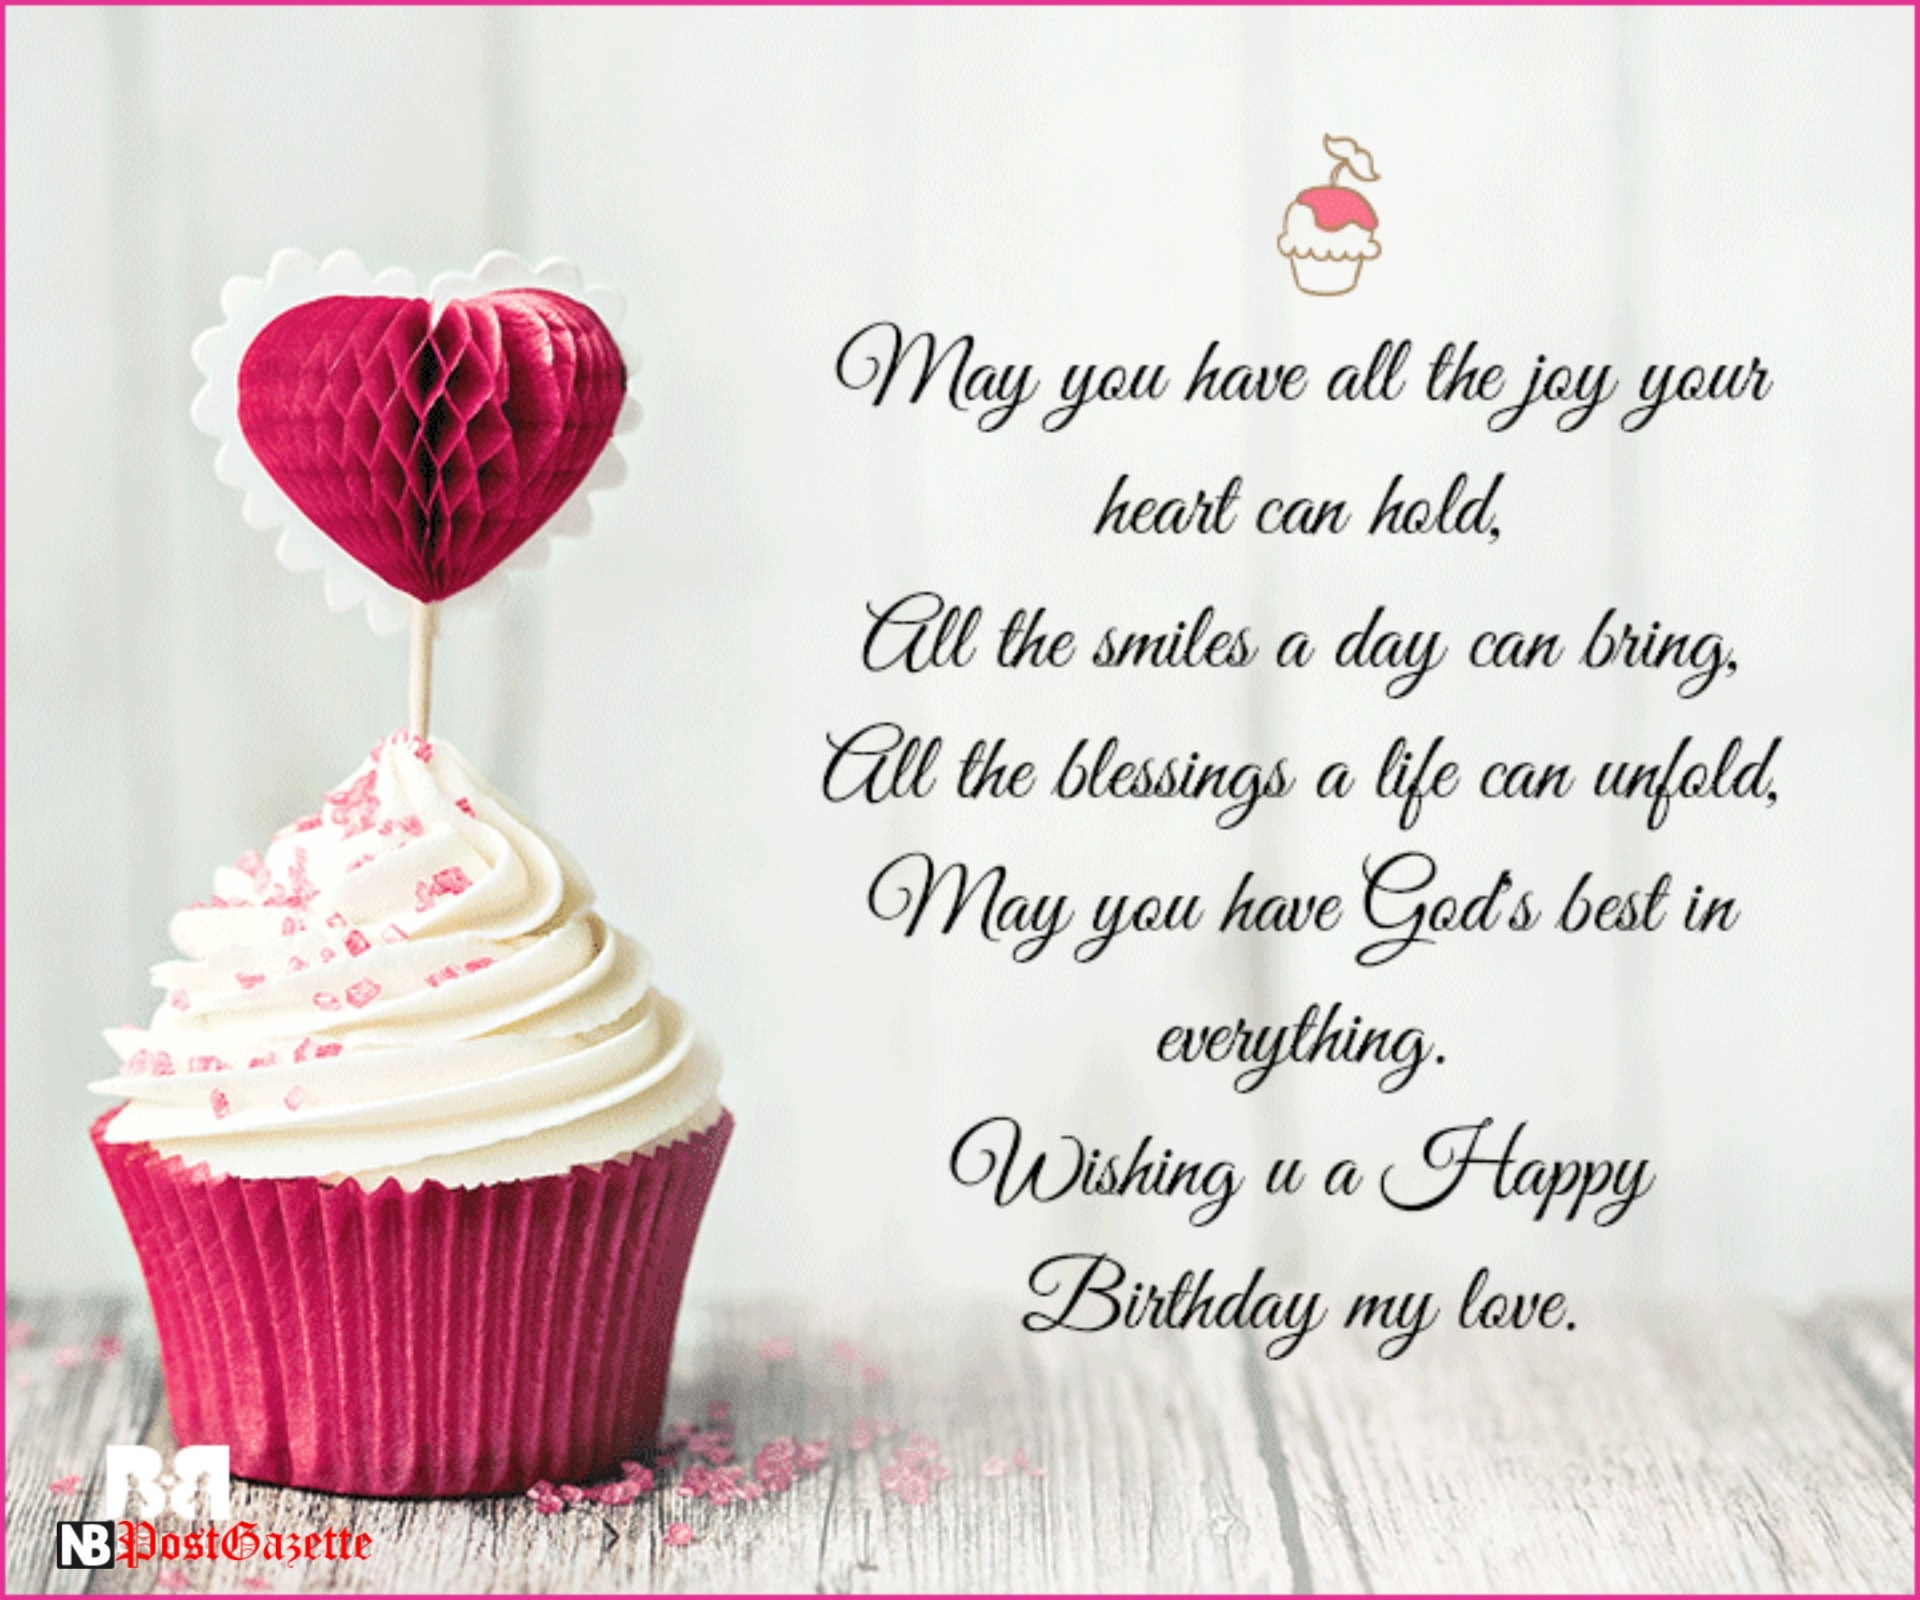 Sms Birthday Wishes
 Top Best Happy Birthday Wishes SMS Quotes & Text Messages